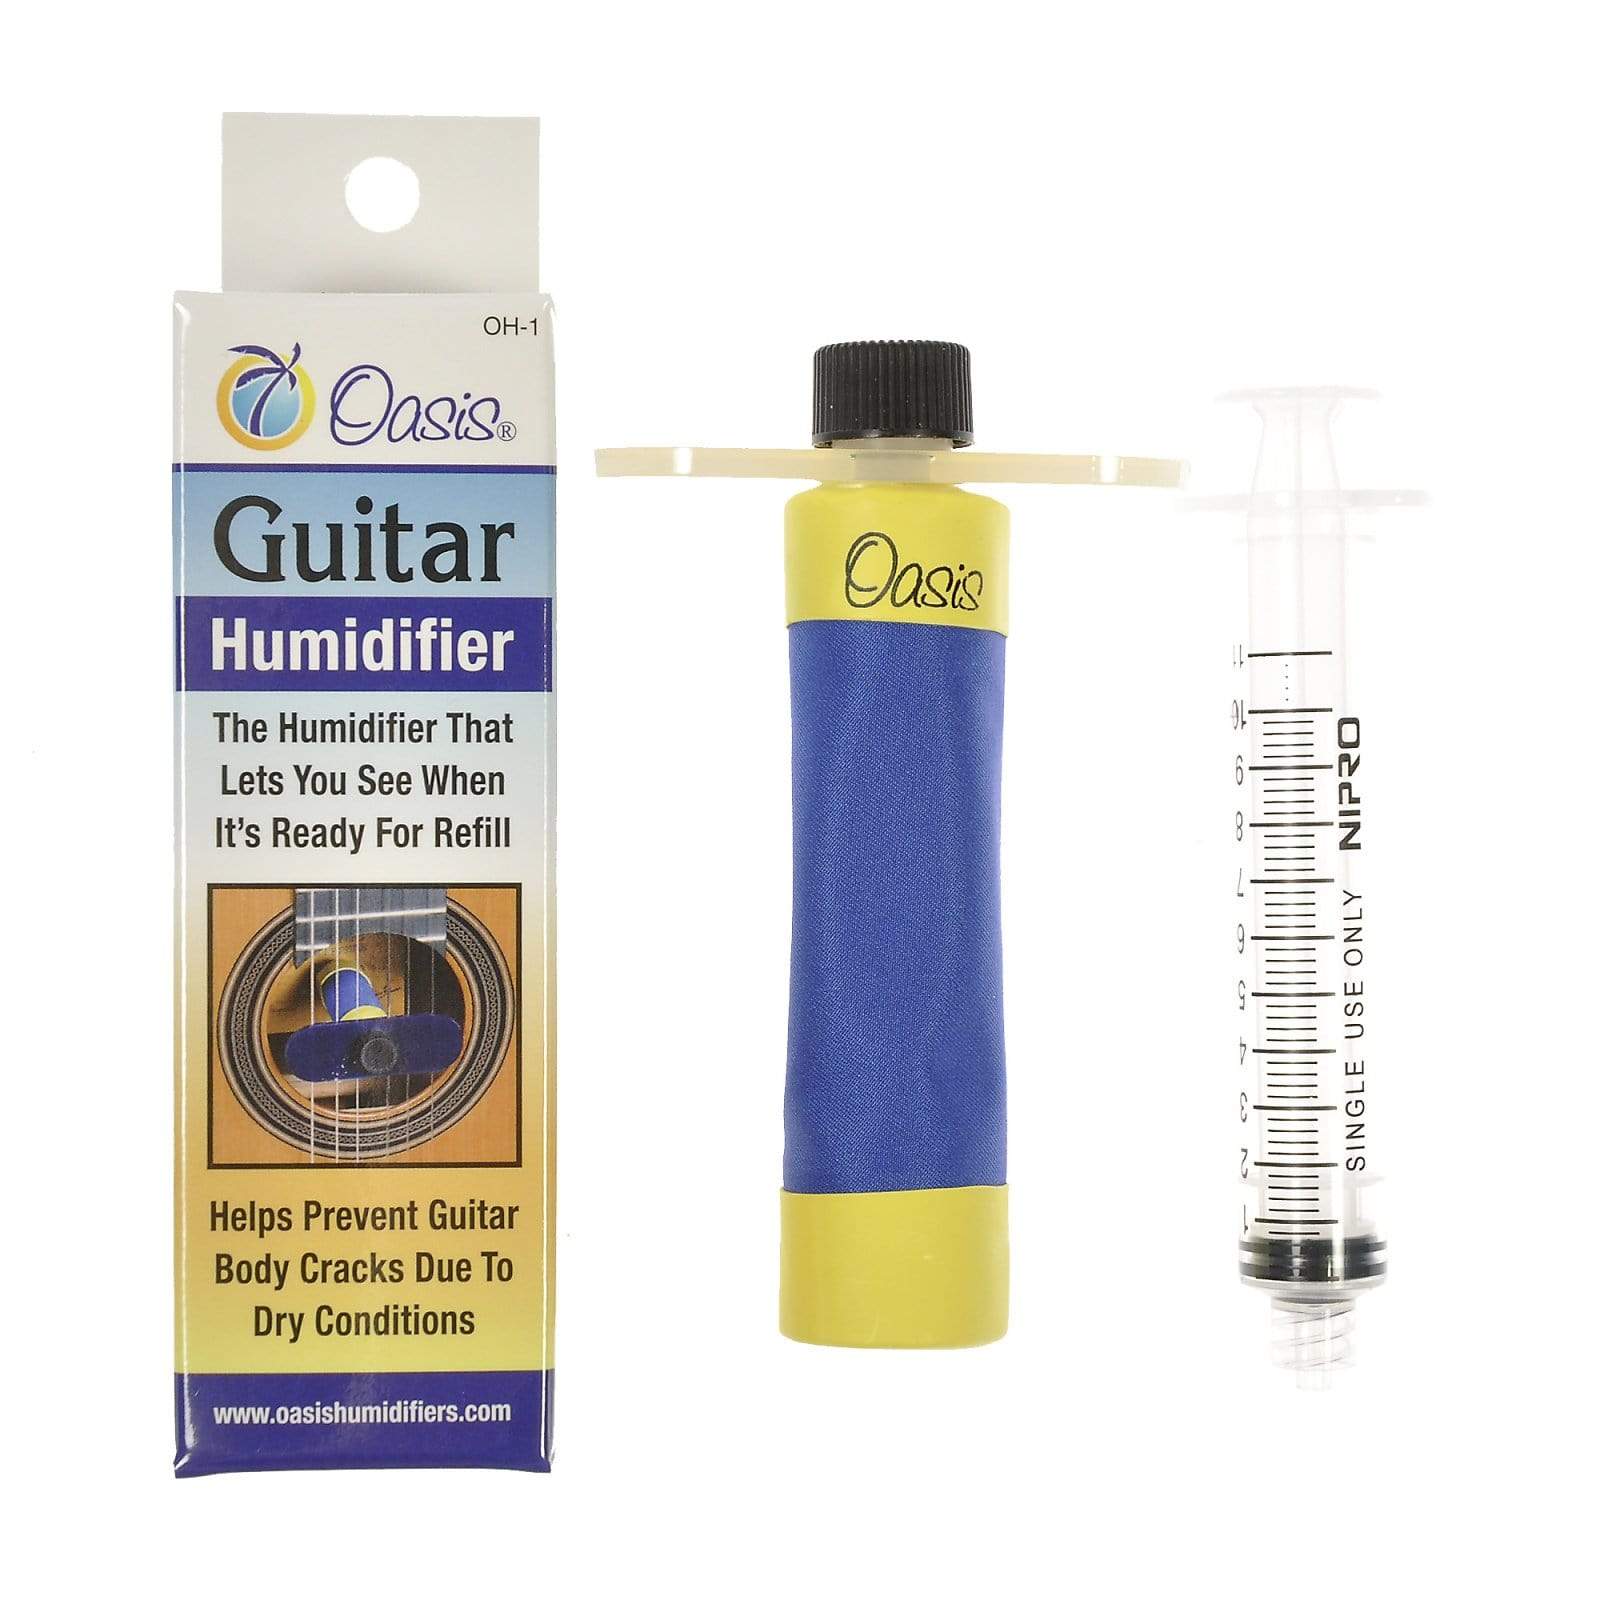 Oasis OH-1 Guitar Humidifier Accessories / Humidifiers